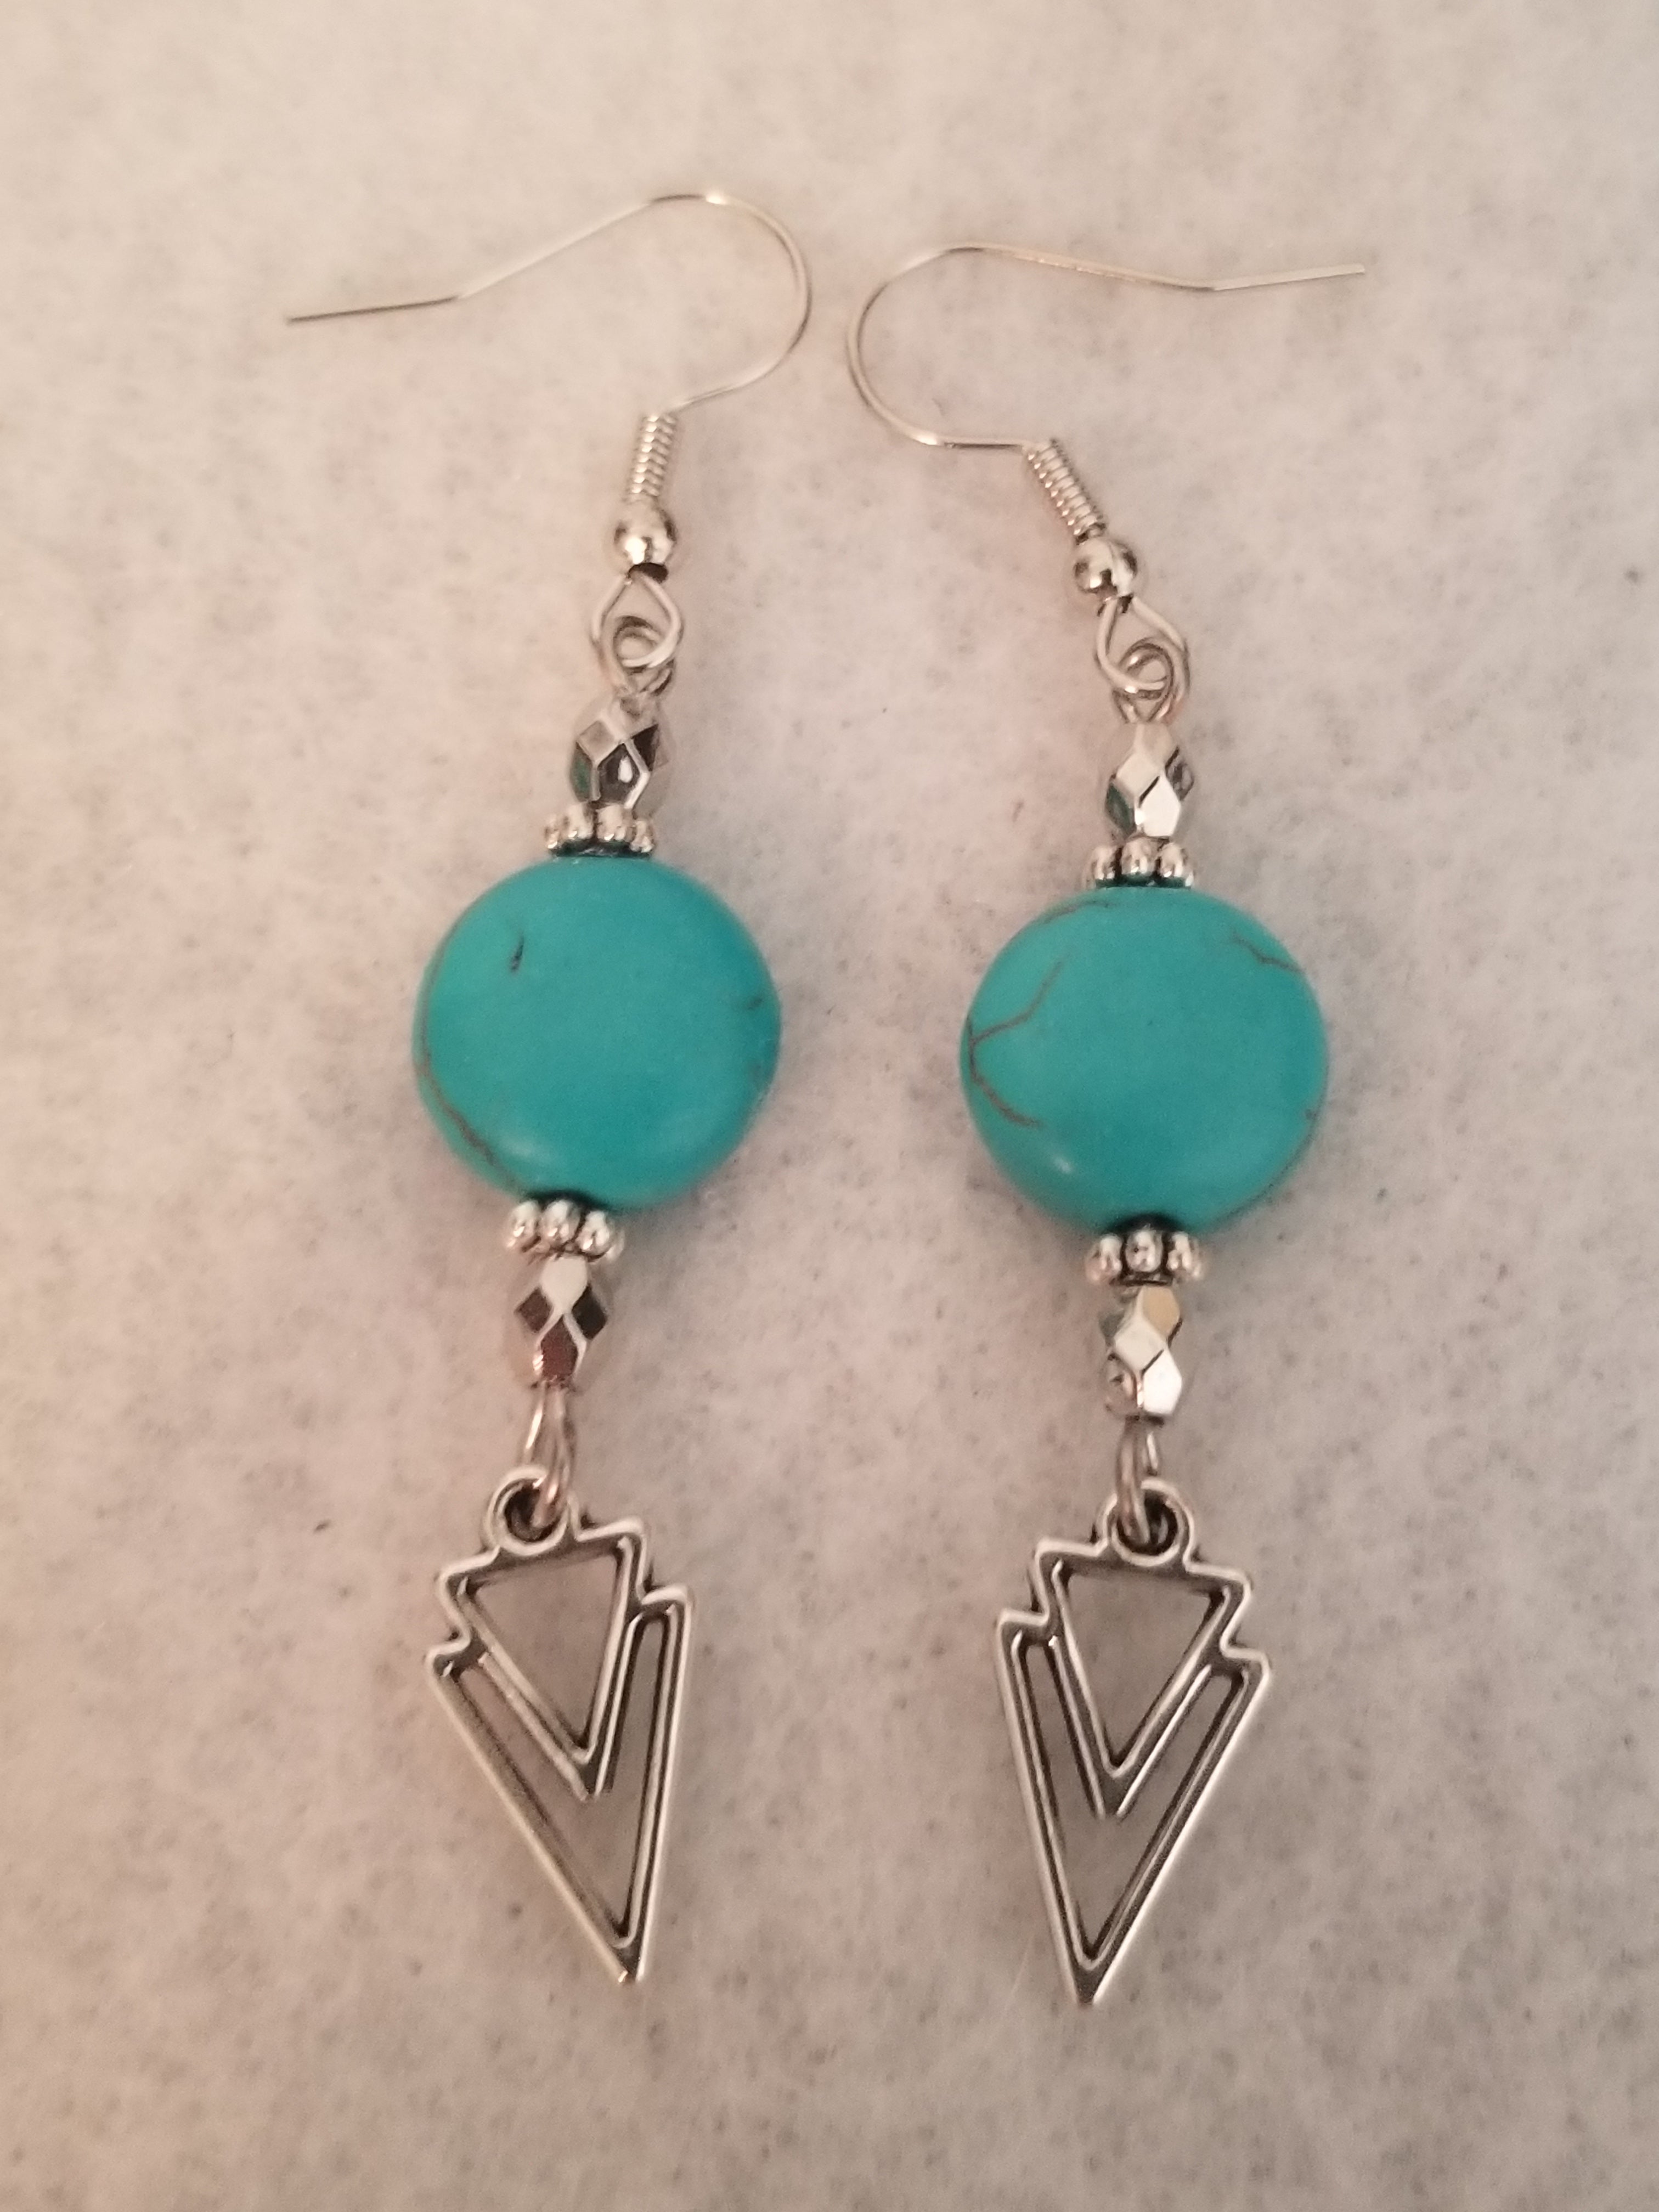 Turquois Colored #89 Earrings